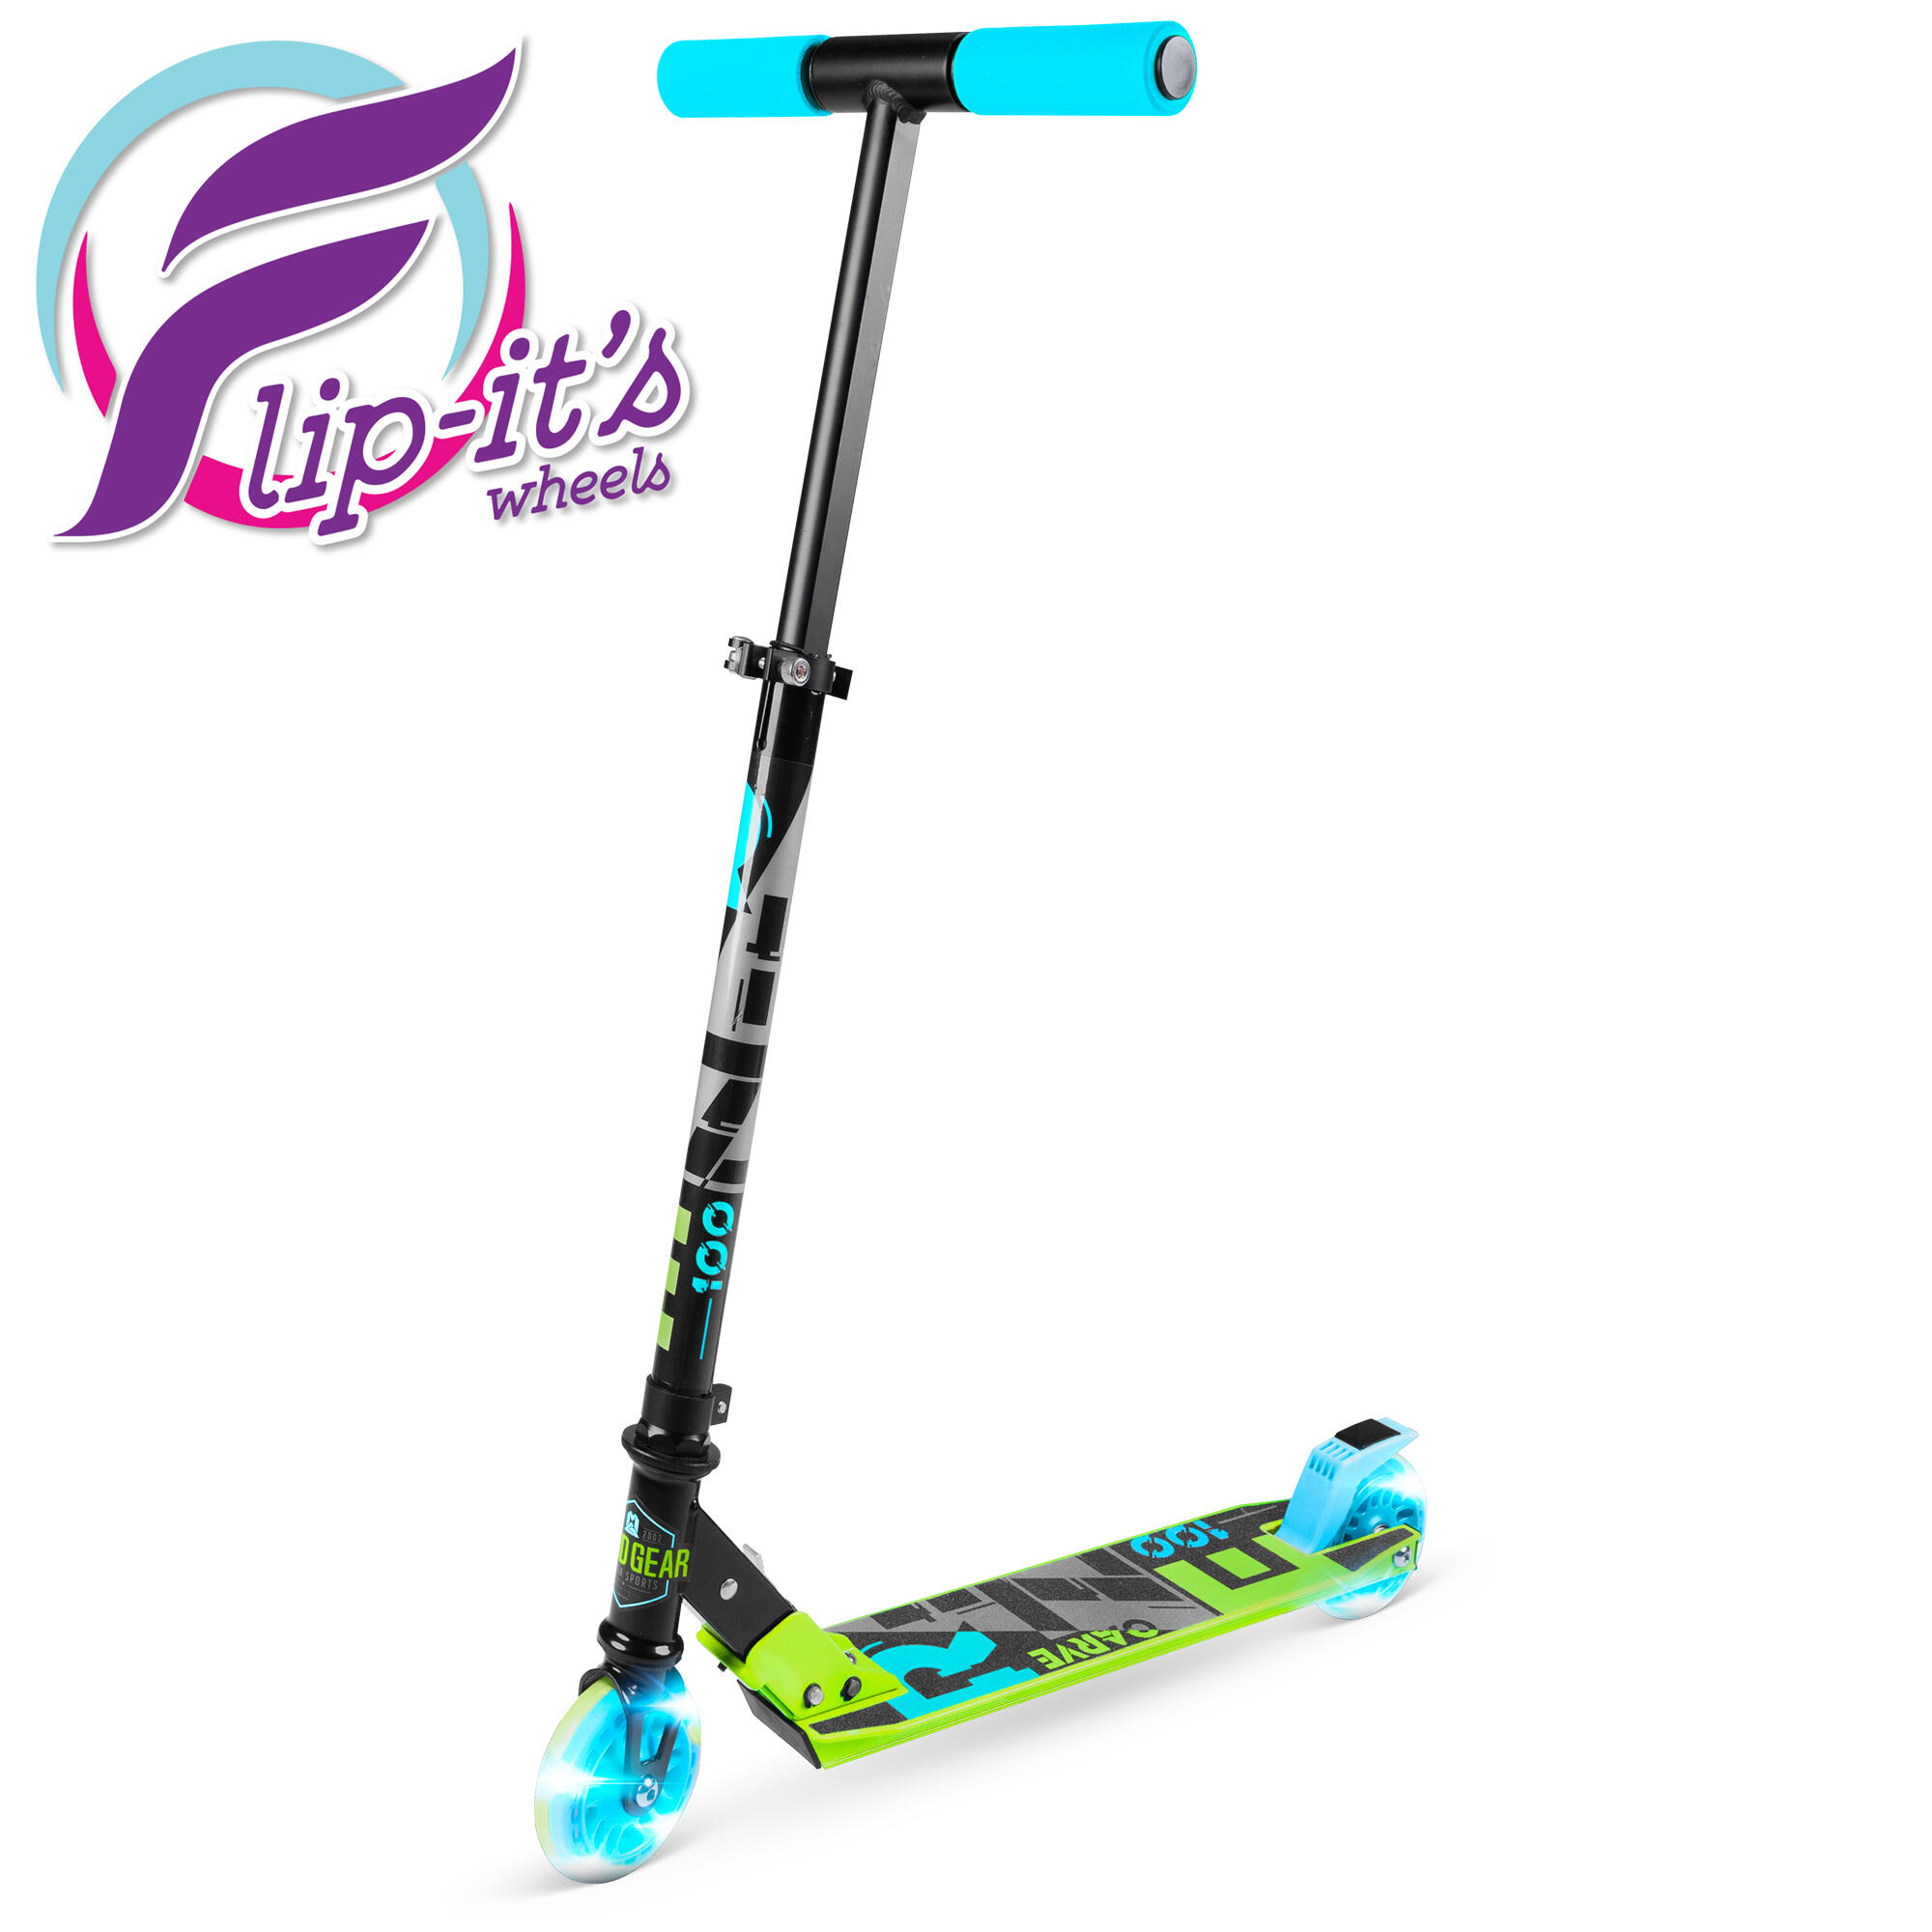 MADD GEAR CARVE RIZE LIGHT UP WHEEL SCOOTER – AGES 3 YEARS+ - WAVES 1/8